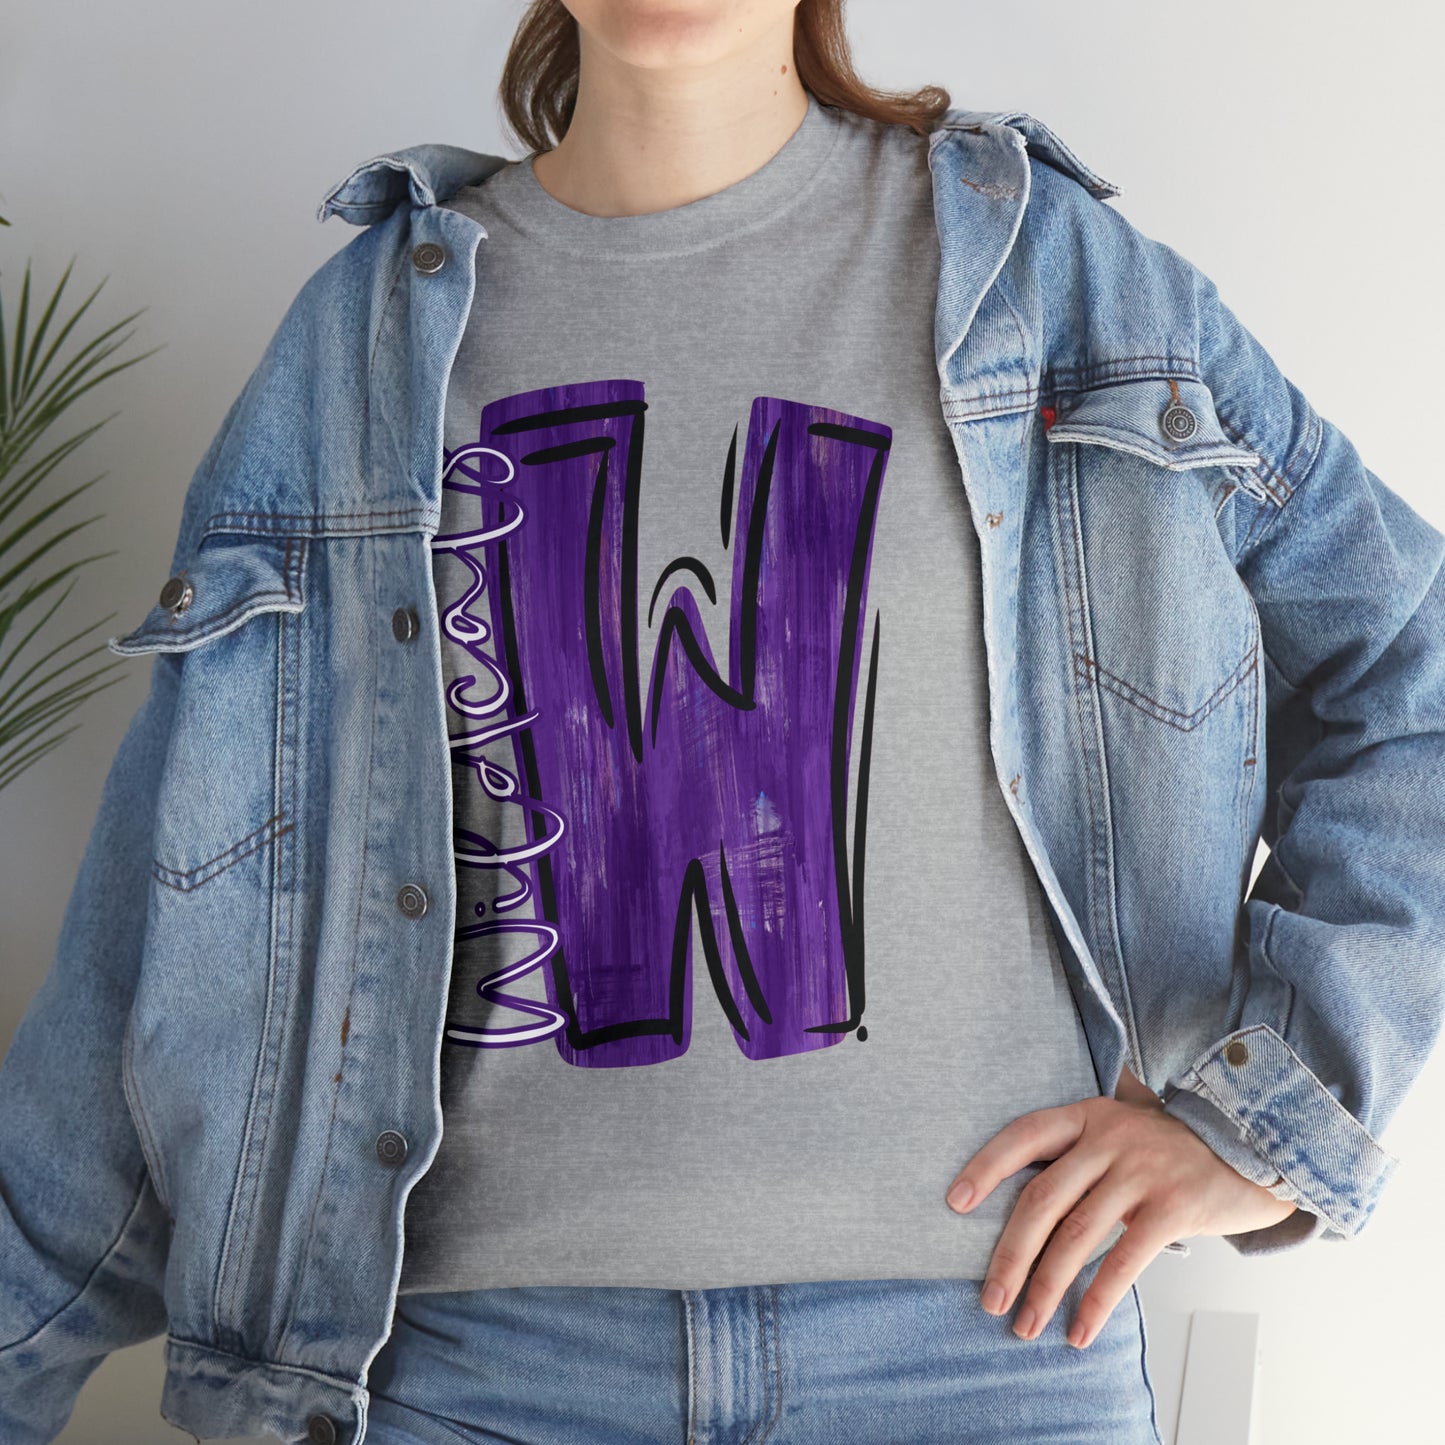 Wildcat Painted W T-Shirt Adult Sizes